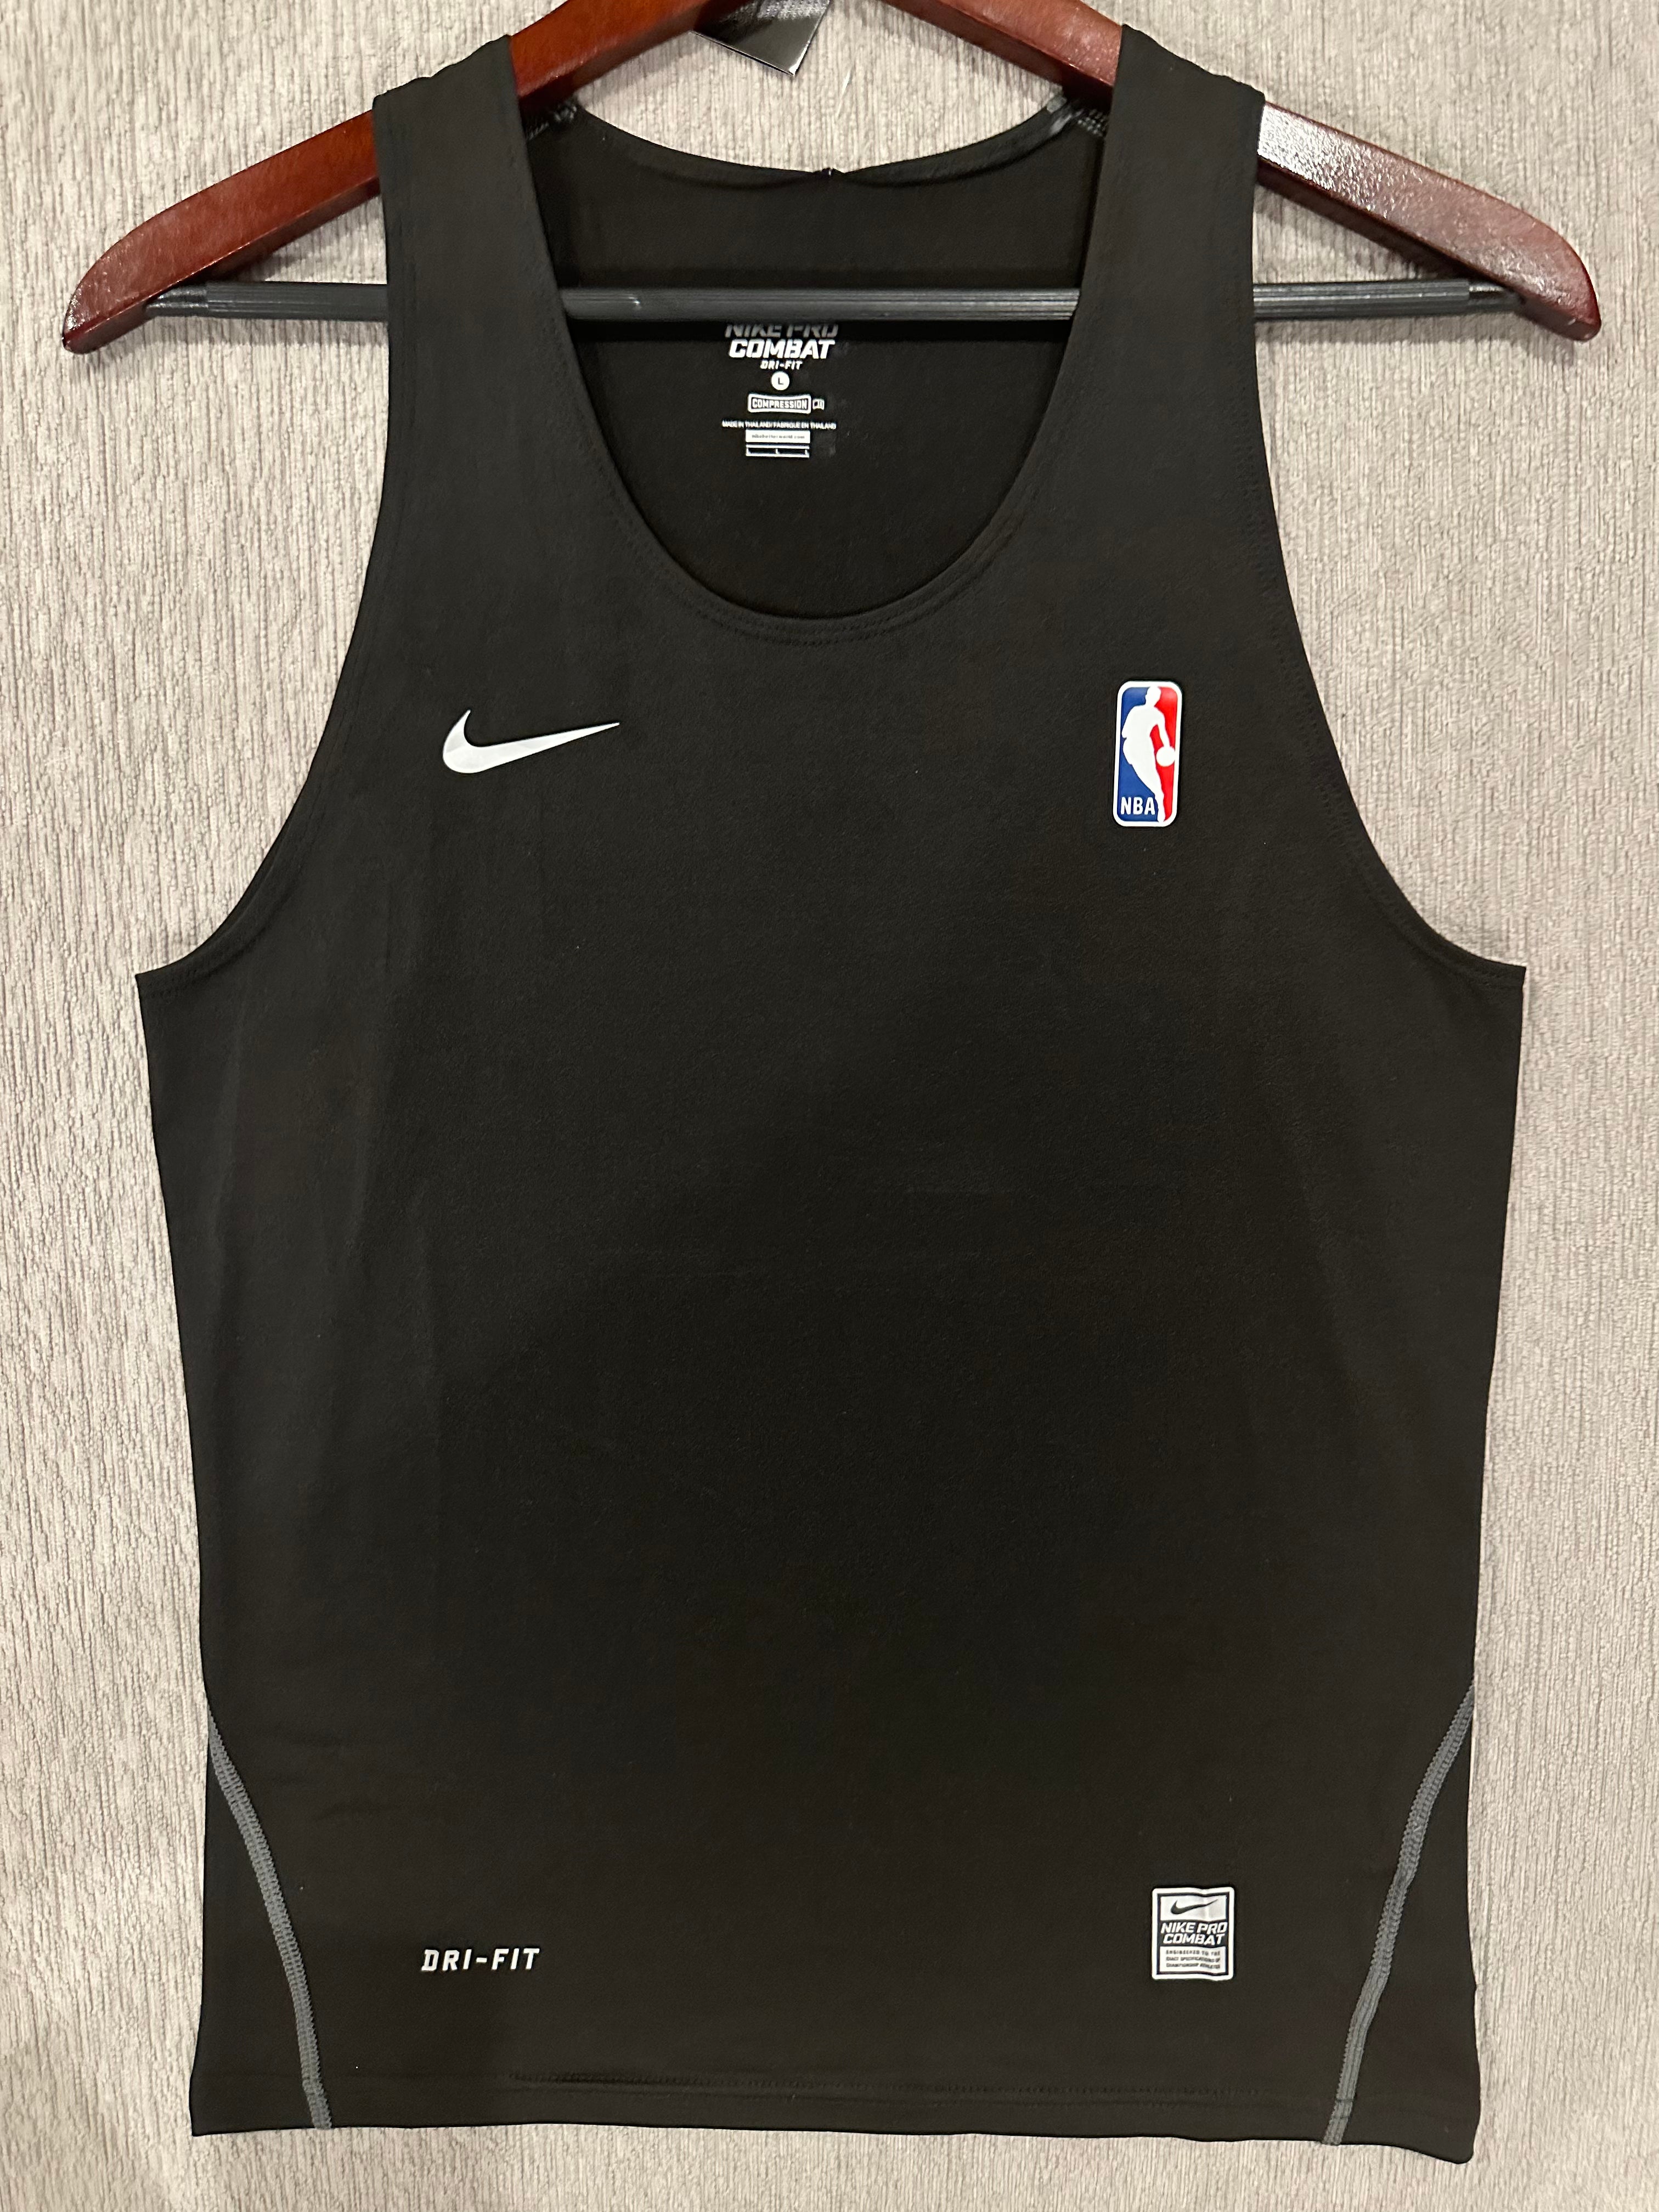 Brand New Nike NBA Player Issued Black Compression Tank Top Size XLT Lebron